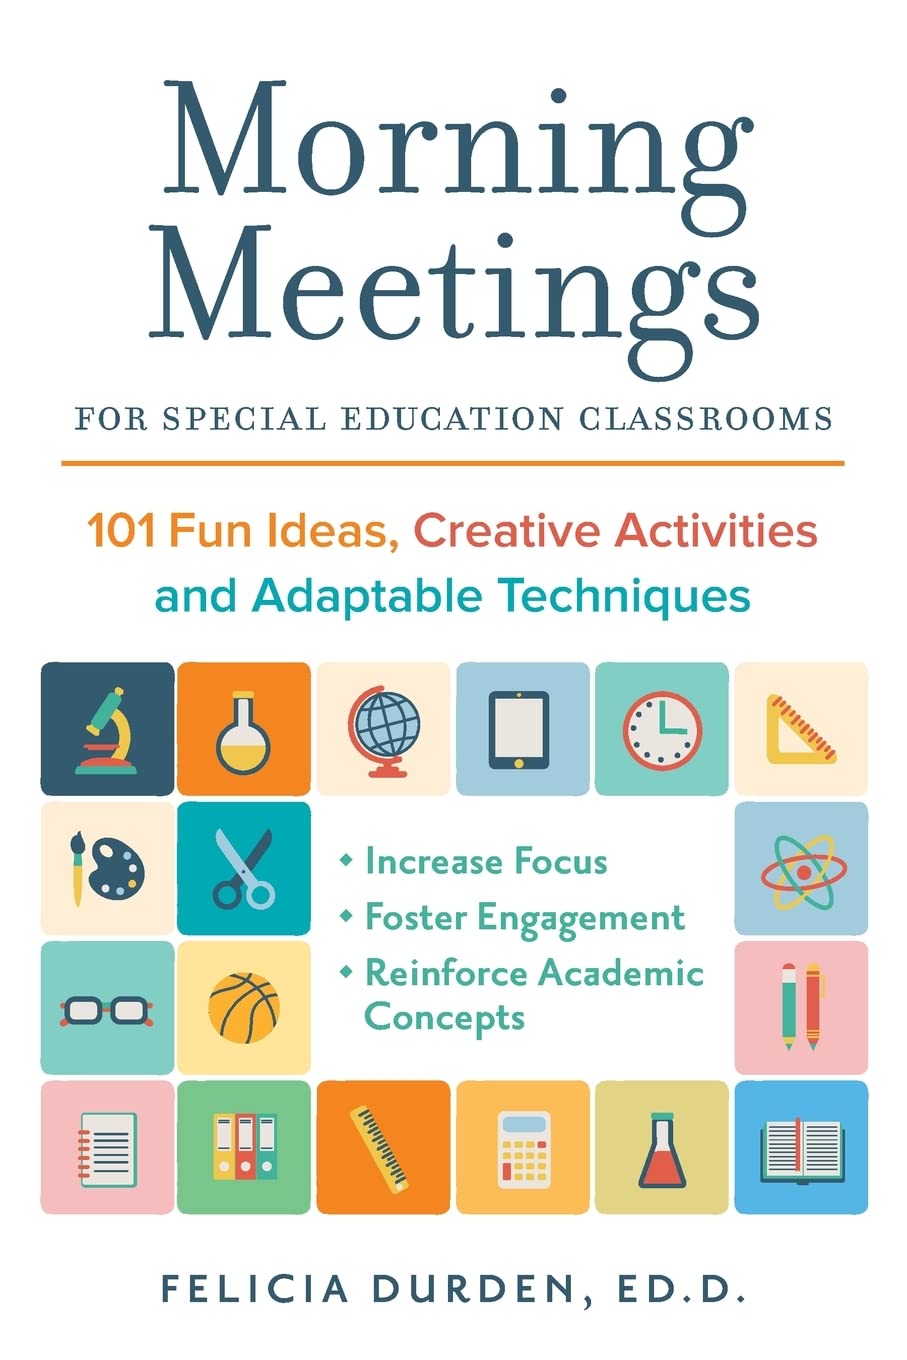 Morning Meetings for Special Education Classrooms: 101 Fun Ideas, Creative Activities and Adaptable Techniques - SureShot Books Publishing LLC